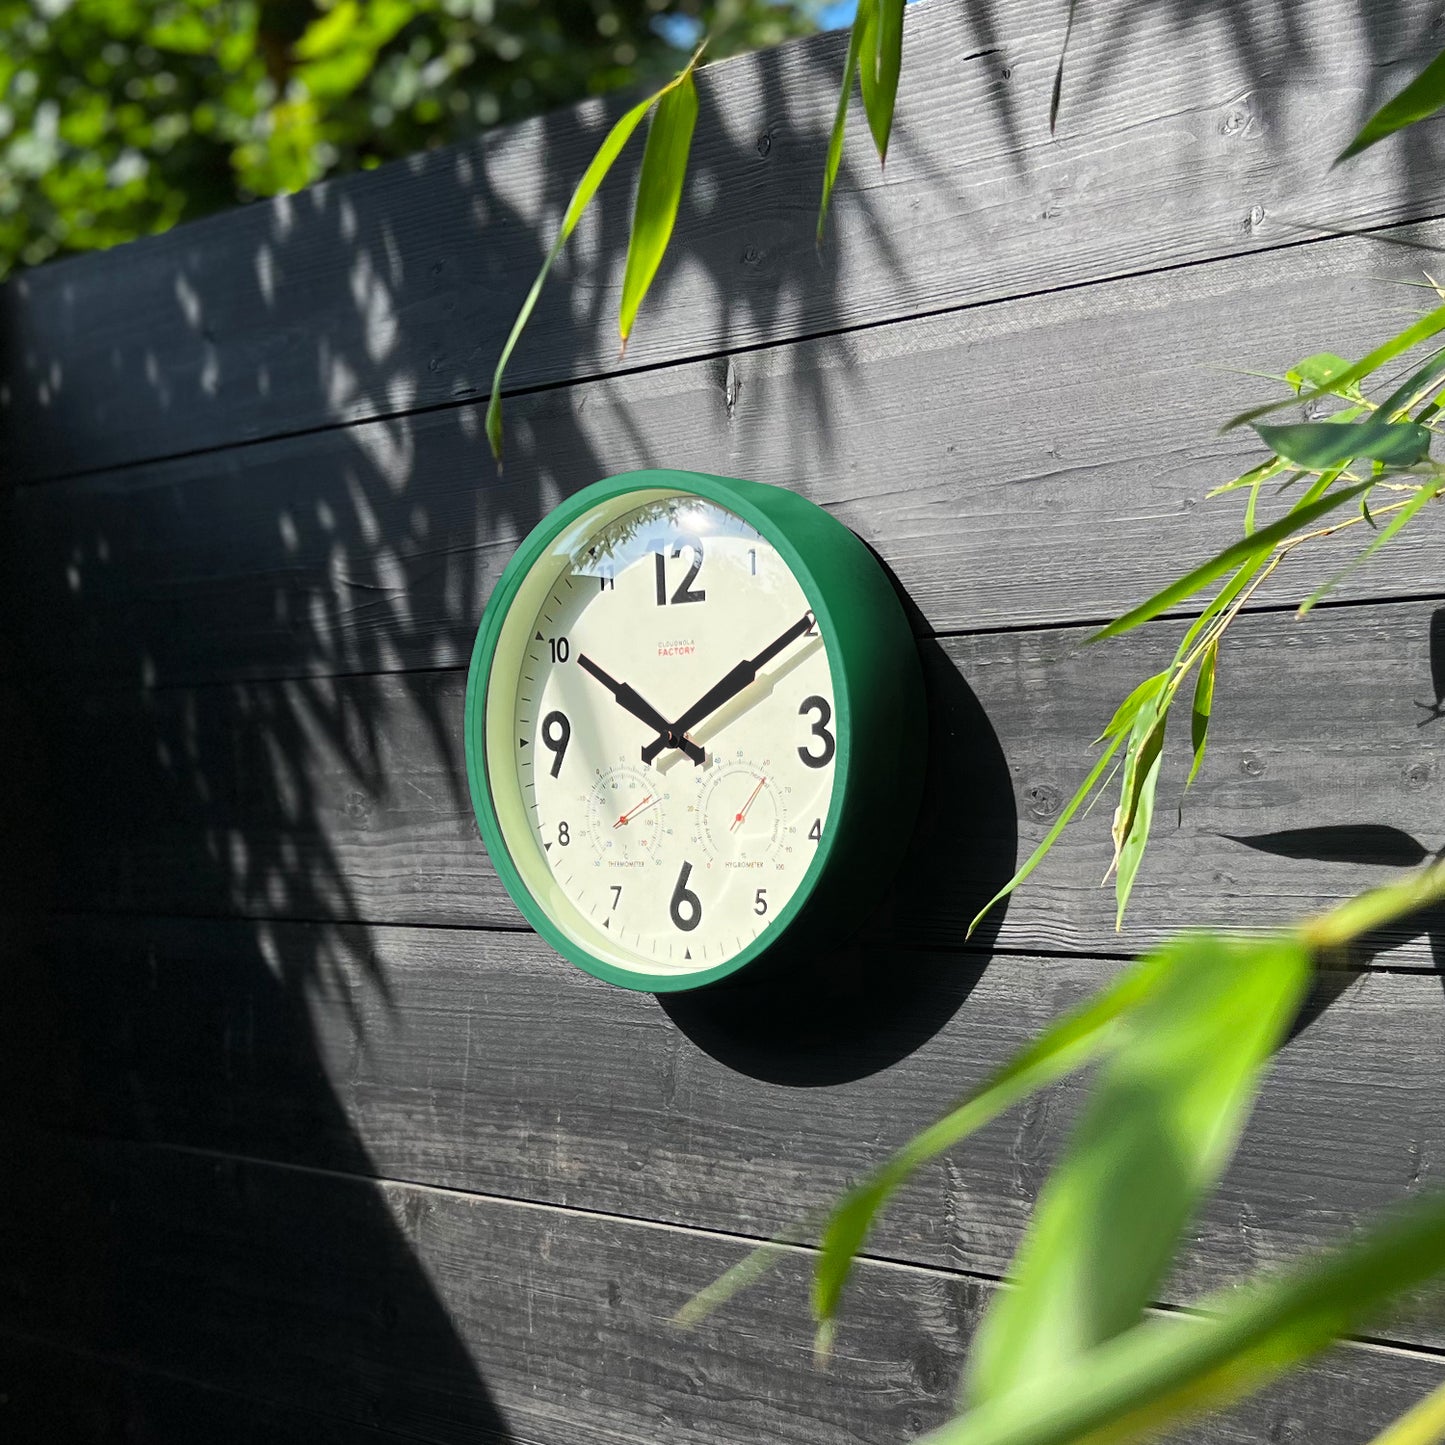 Factory Outdoor Green - Diameter 11.81 - Wall Clock - Weather-Ready Station with Hygrometer & Temperature